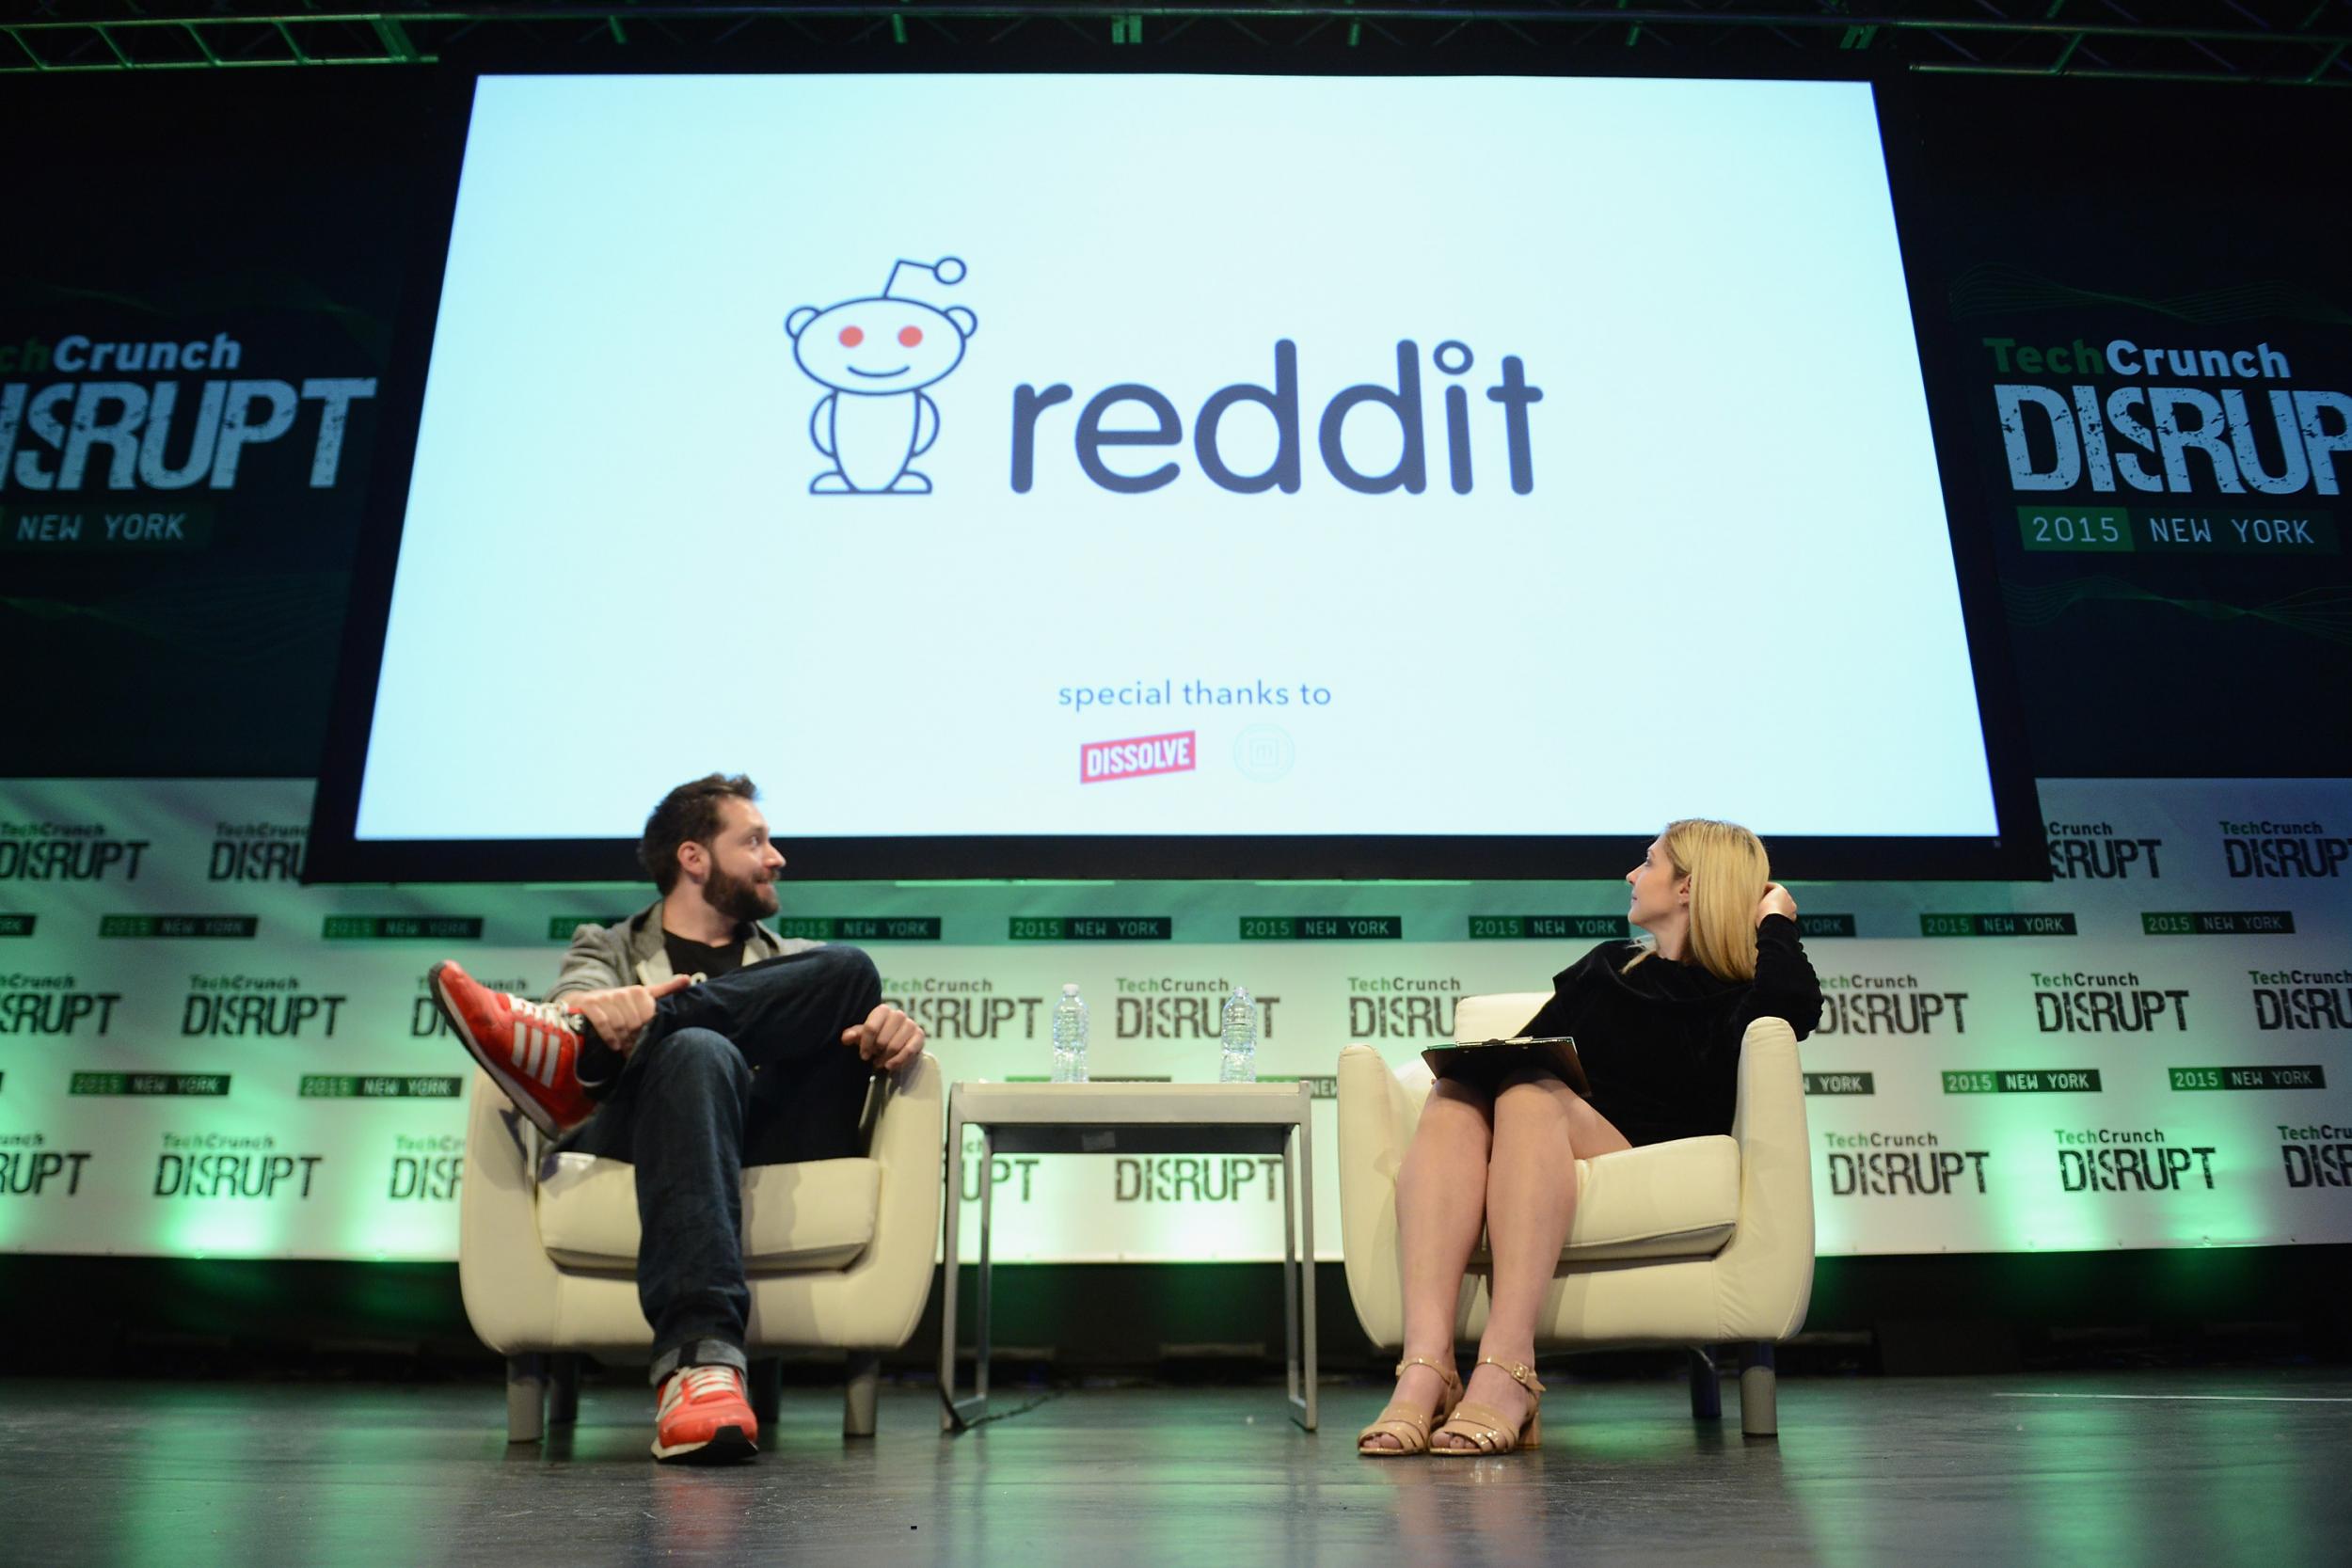 Co-Founder and Executive Chair of Reddit Alexis Ohanian speaks at TechCrunch Disrupt 2015